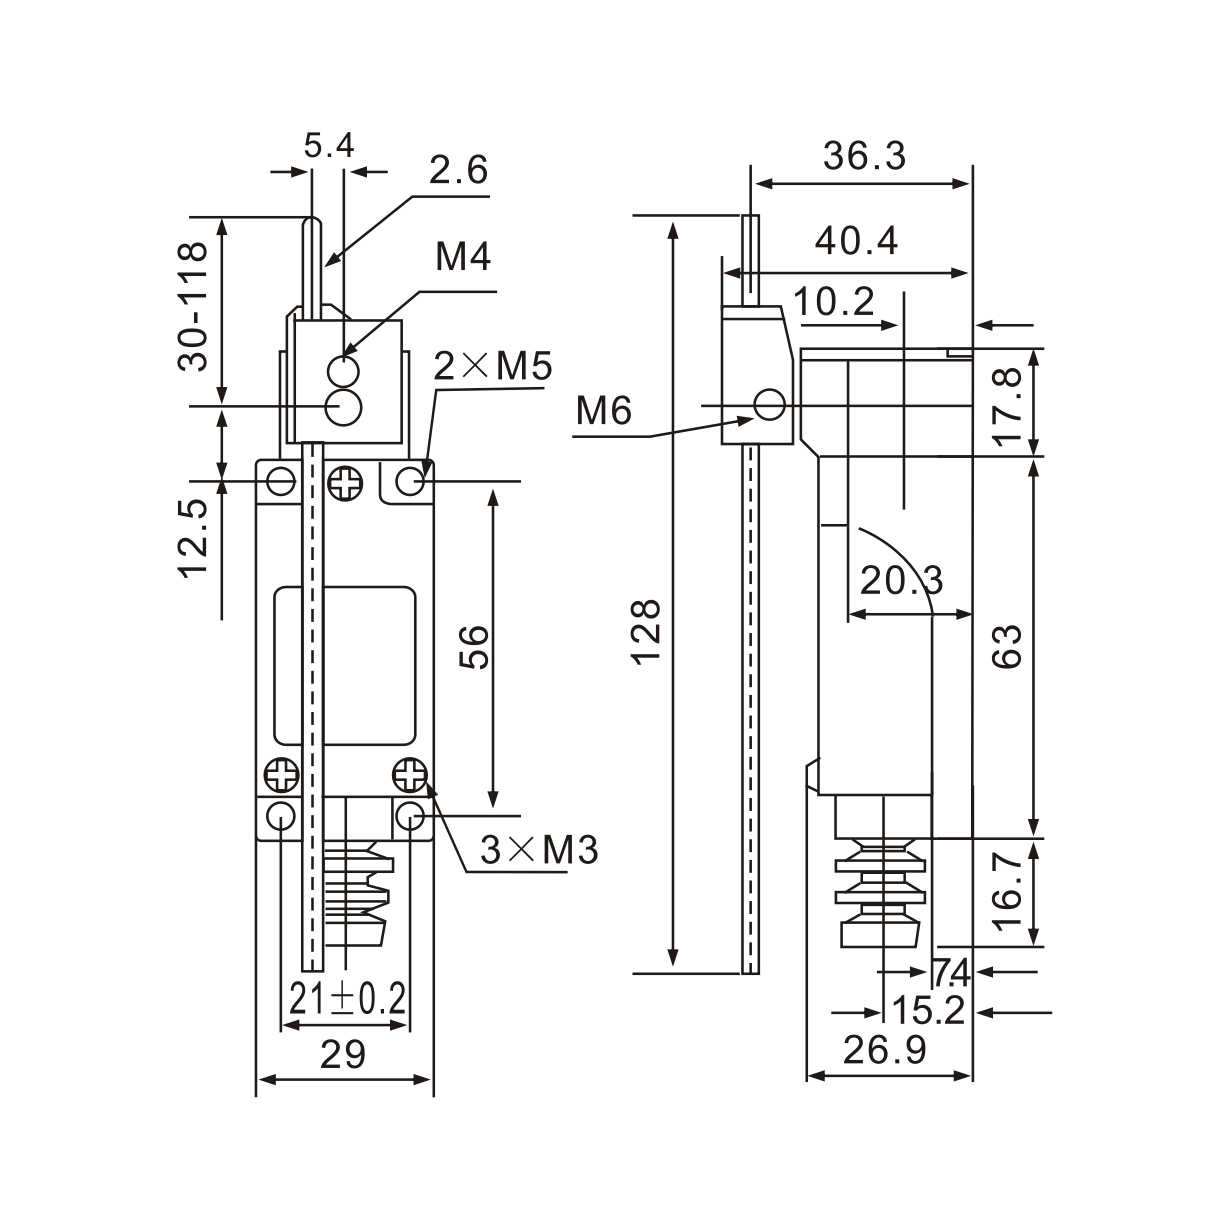 ME-8107 Adjustable Rod Lever Arm Momentary Limit Switch Diagram